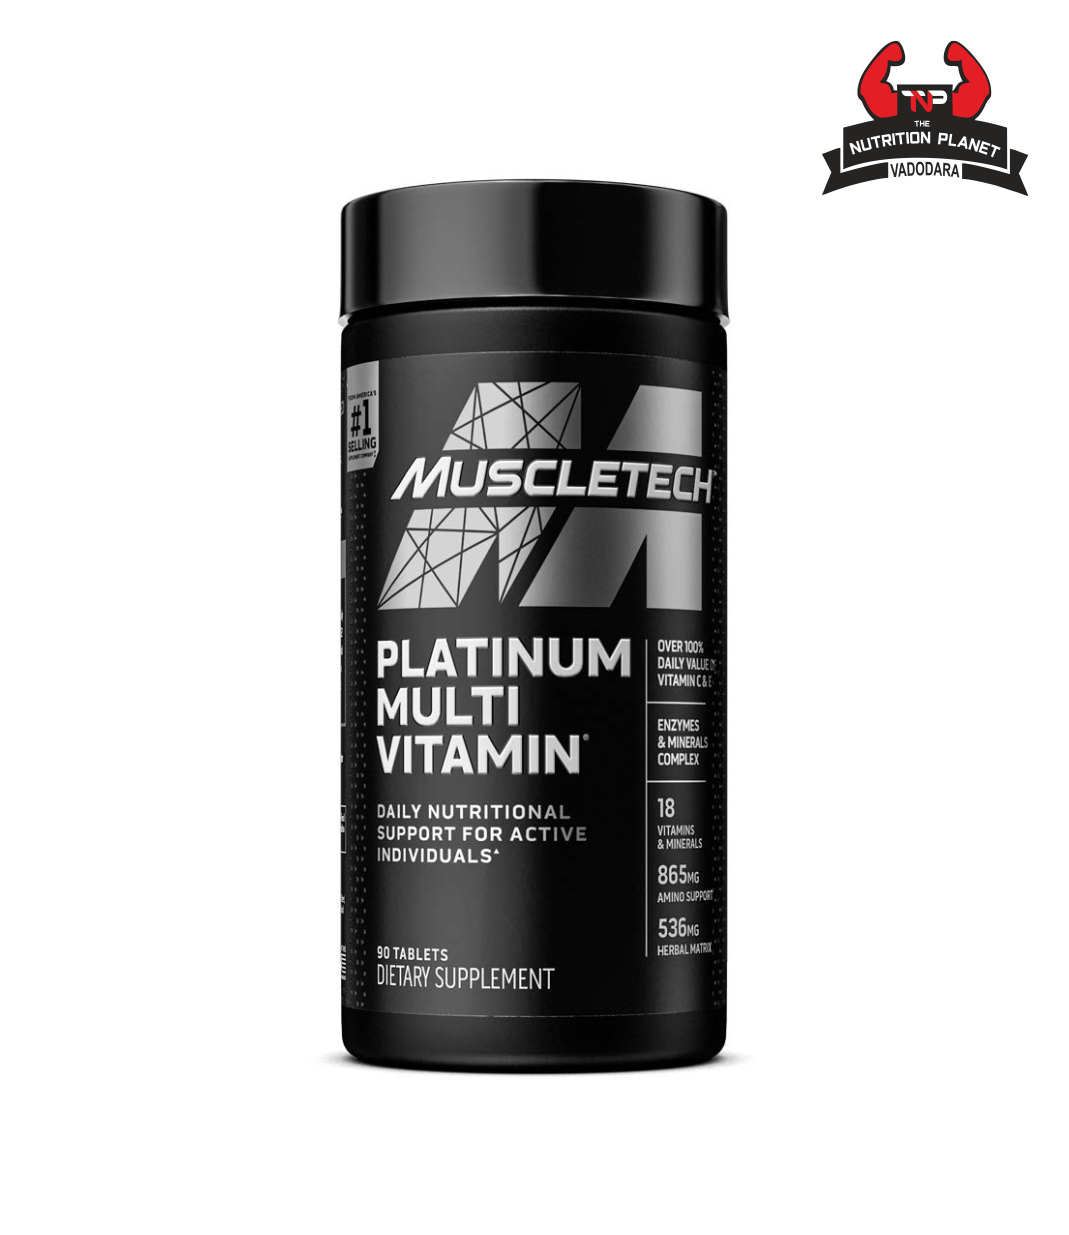 Muscletech Essential Series Platinum Multivitamin | Vitamins & Minerals | Amino Support | Promotes A Healthy Body | Daily Nutrition | 60 Tablets